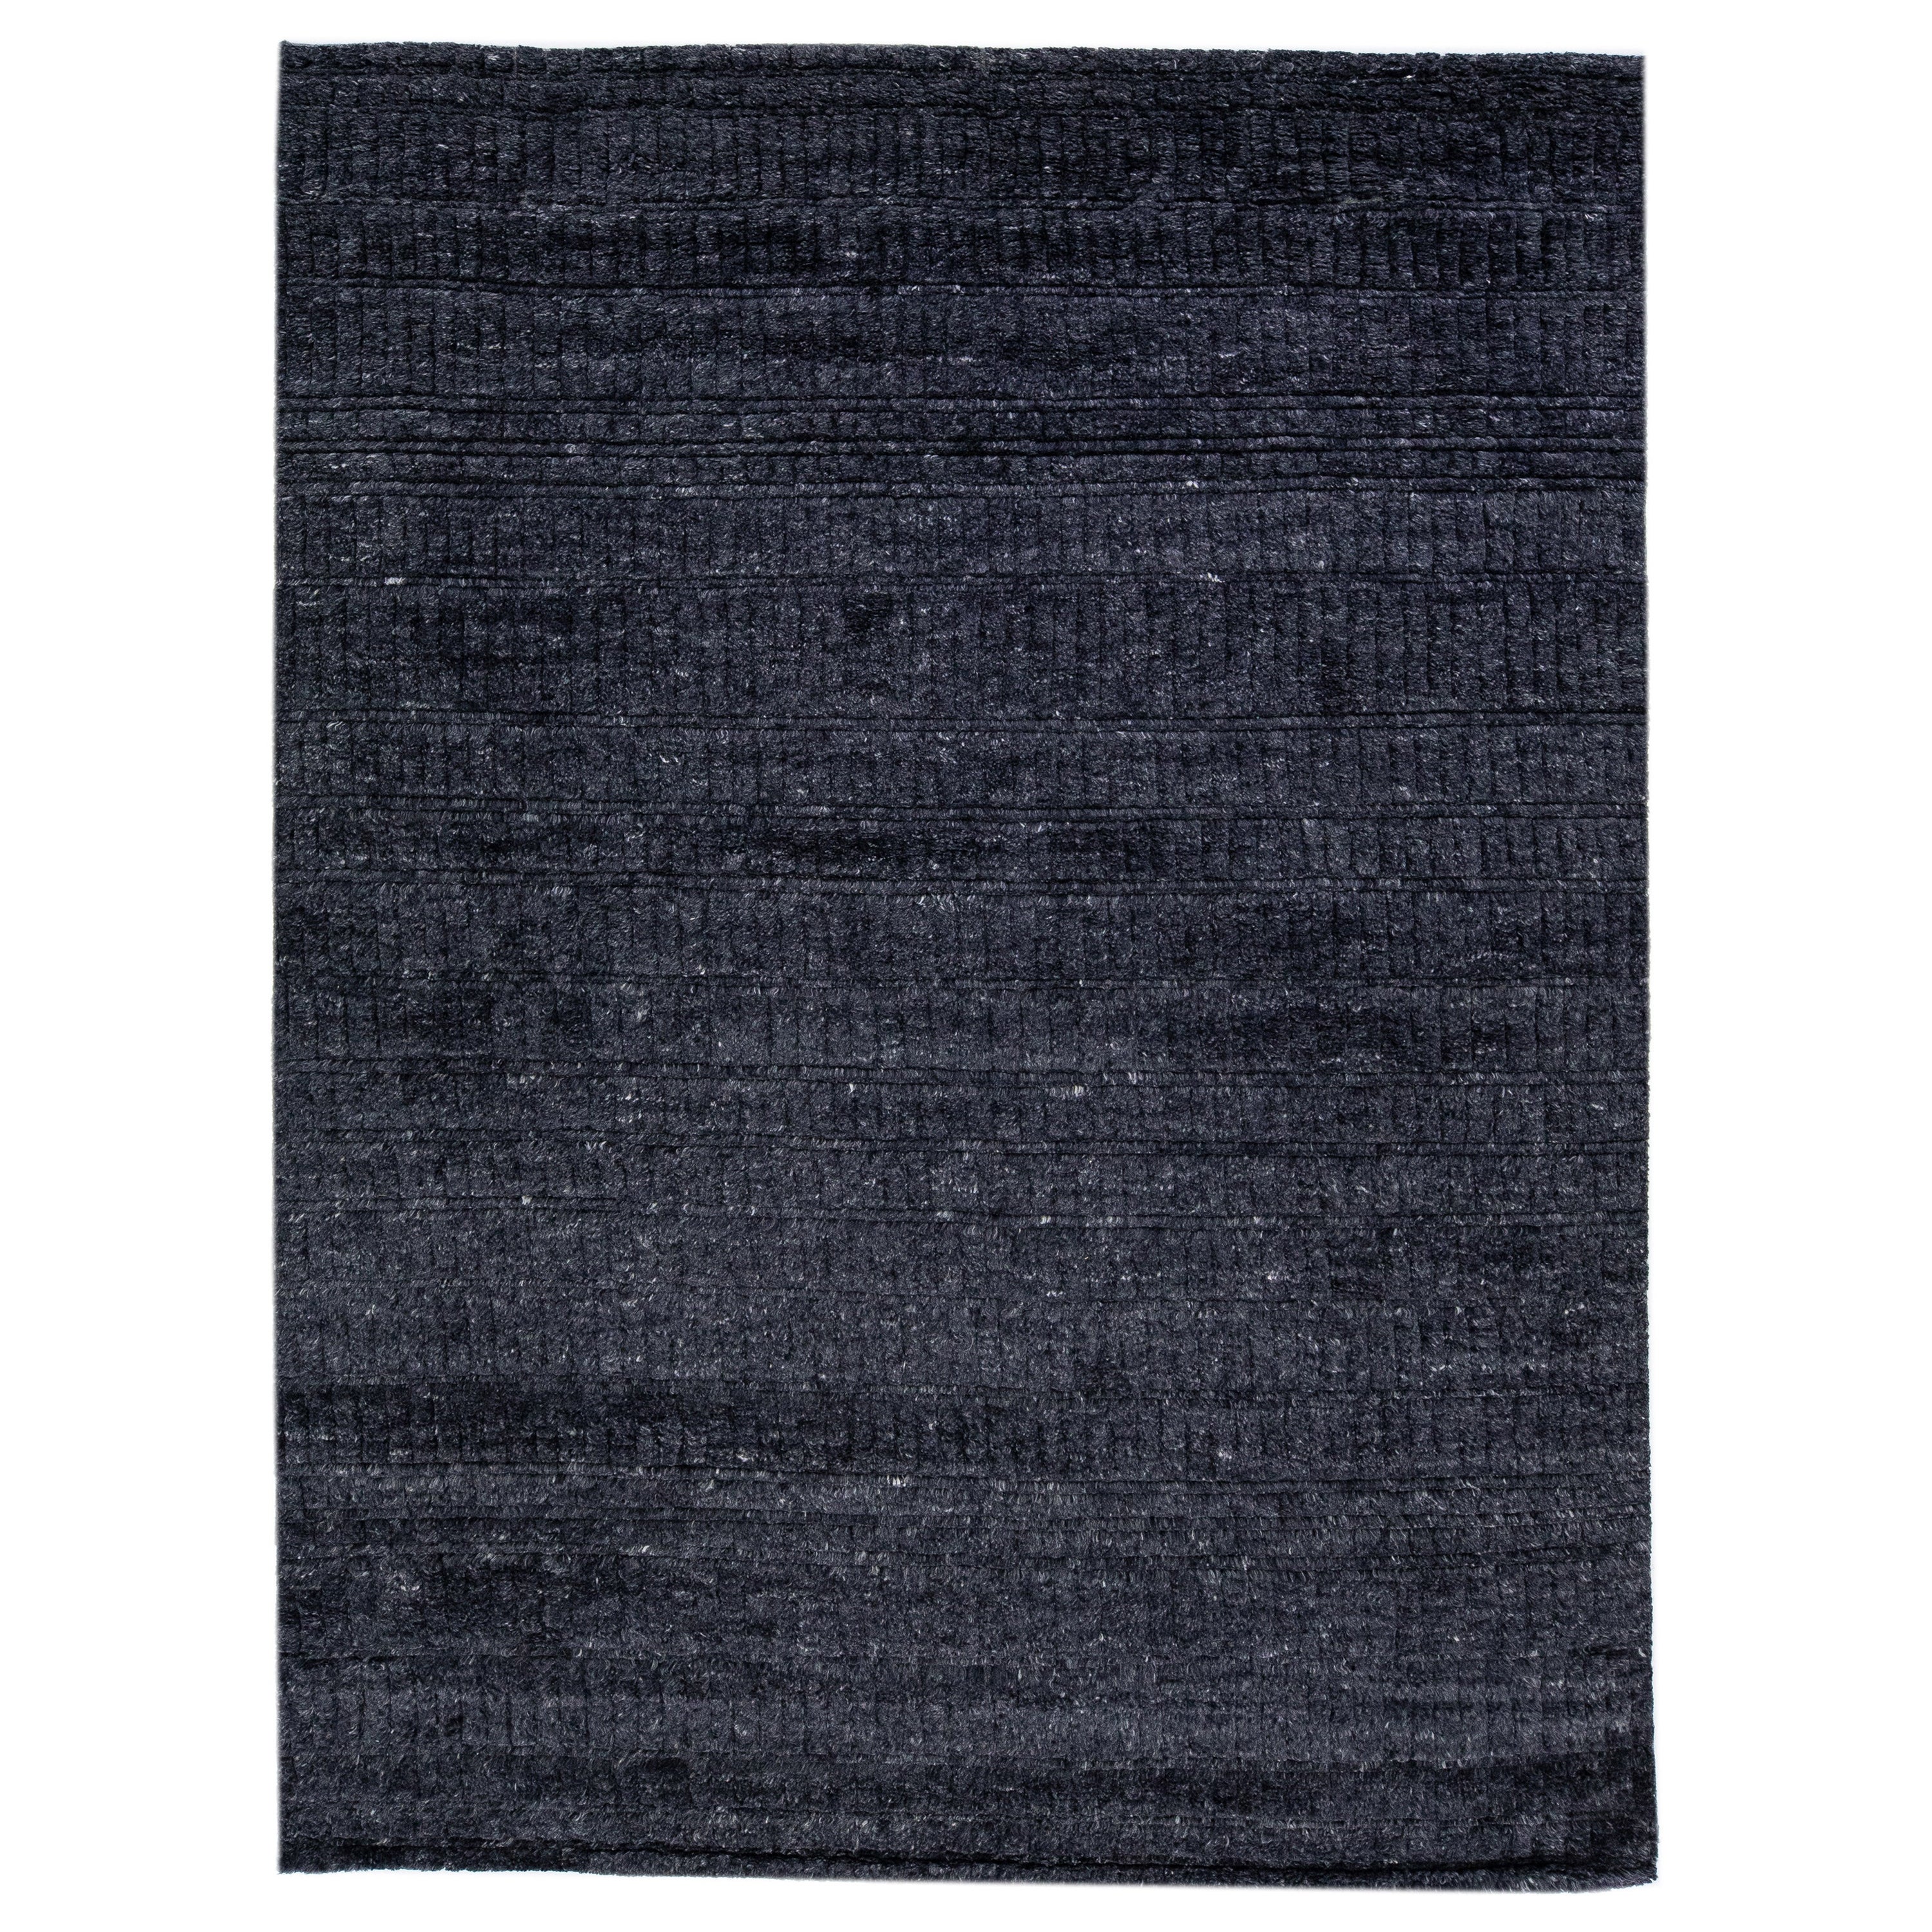 Moroccan Contemporary Texture Handmade Wool Rug with Charcoal Color Field 